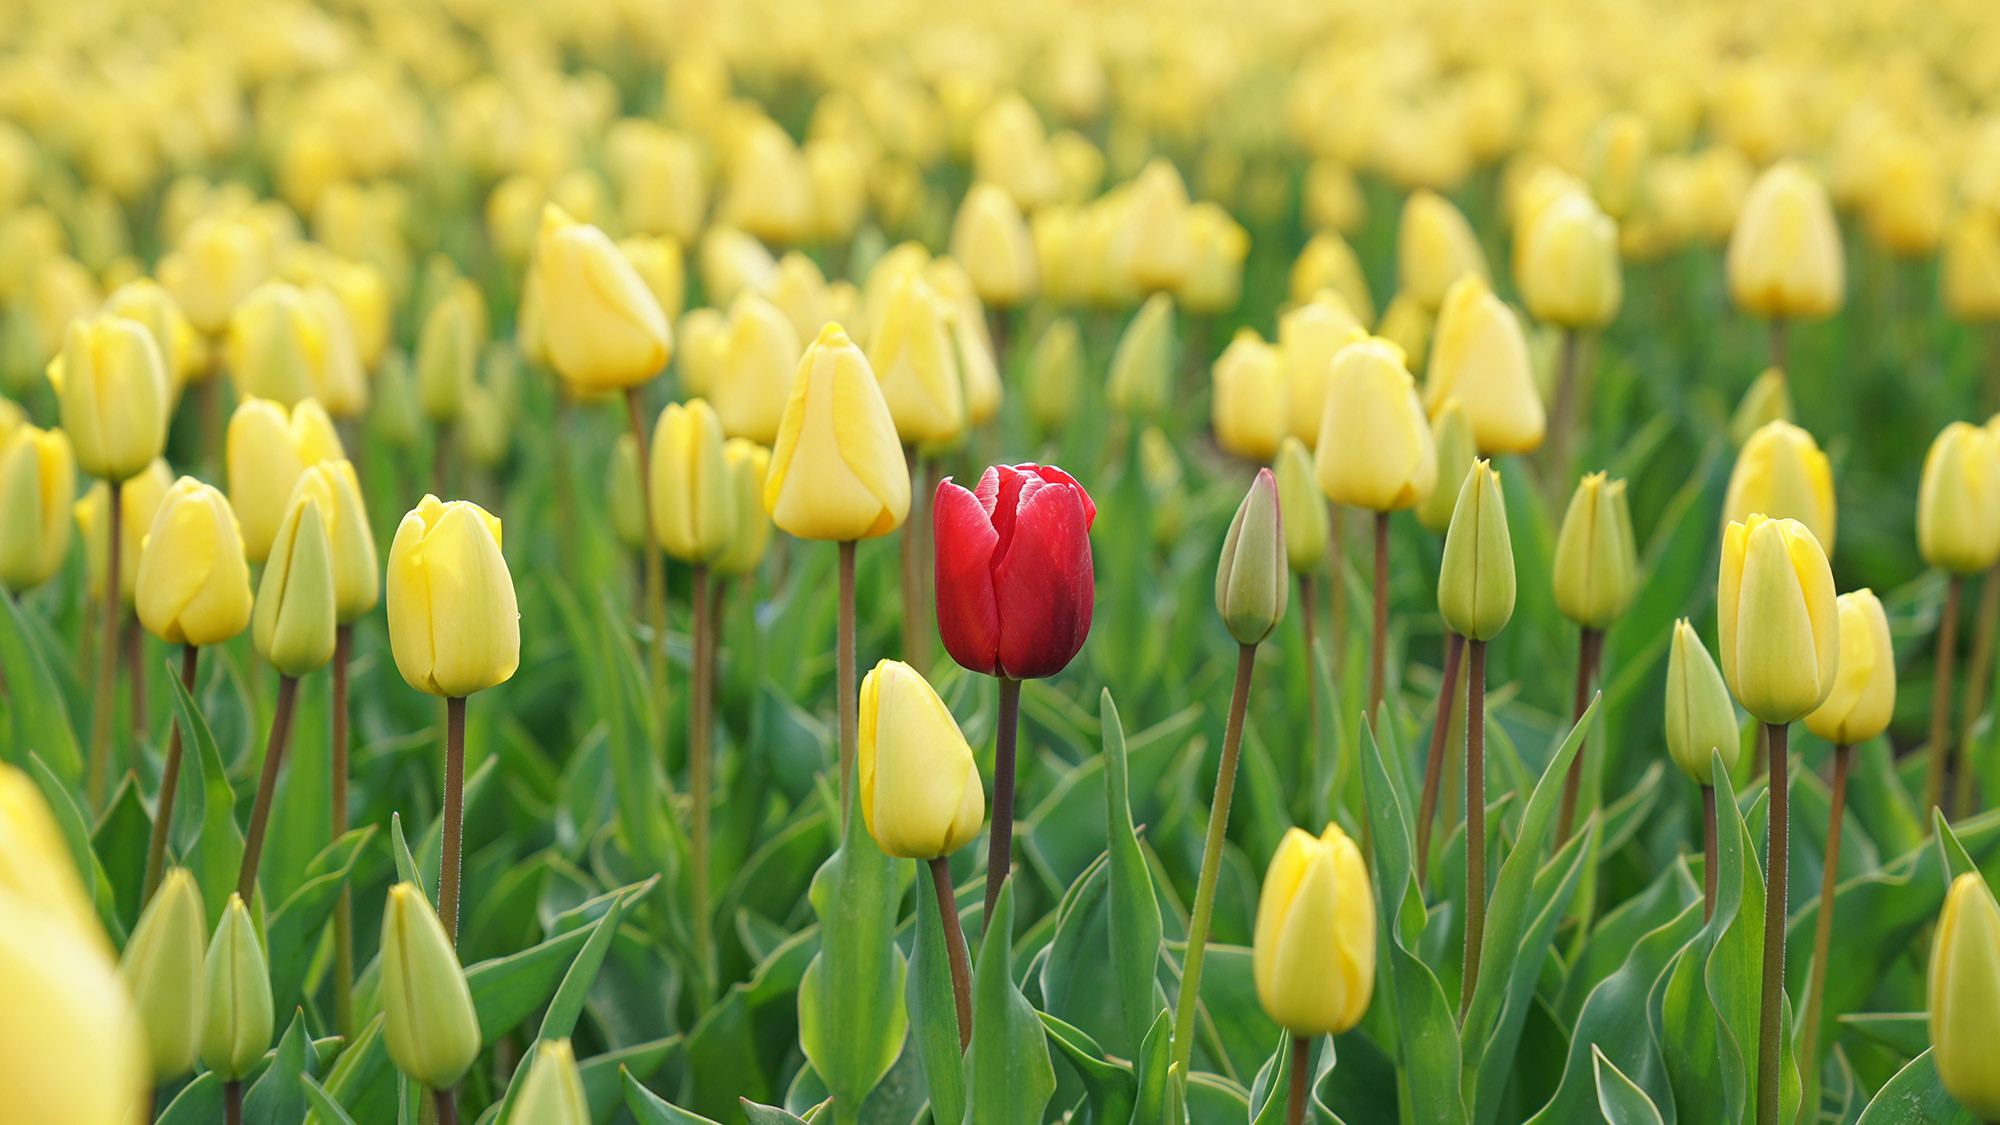 One red tulip in a field of yellow tulips